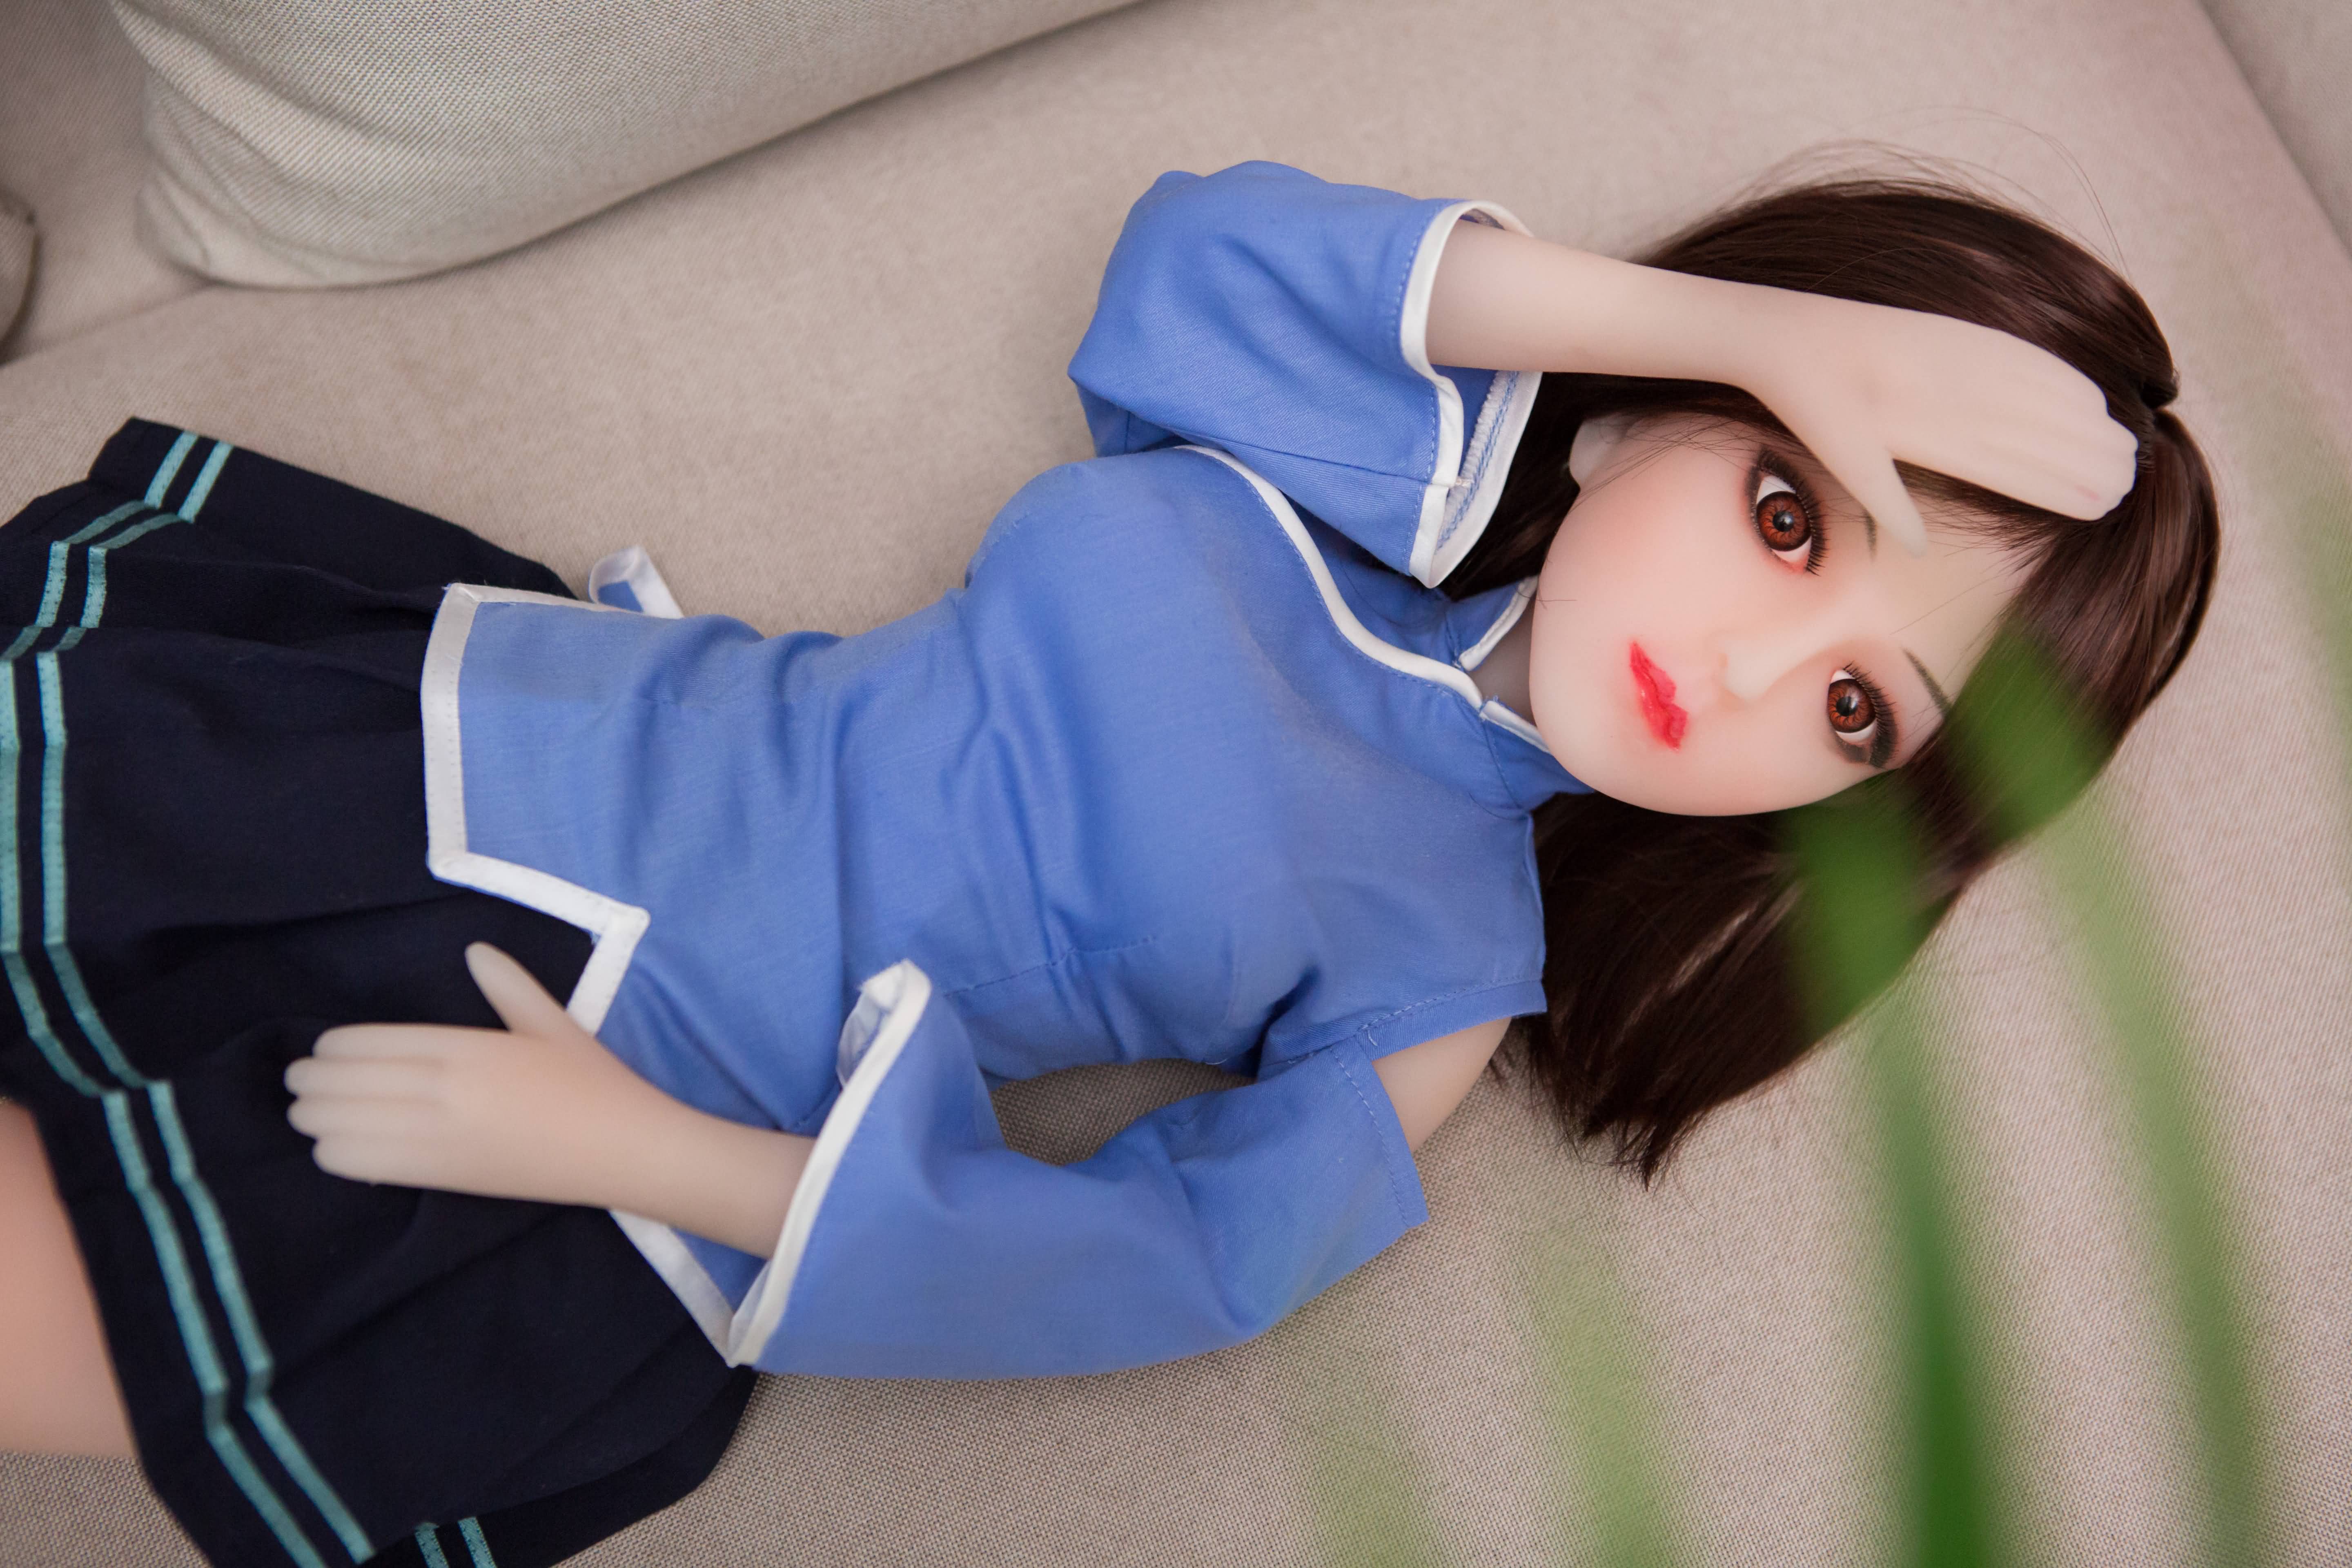 Using sex dolls to relieve loneliness true story (2)